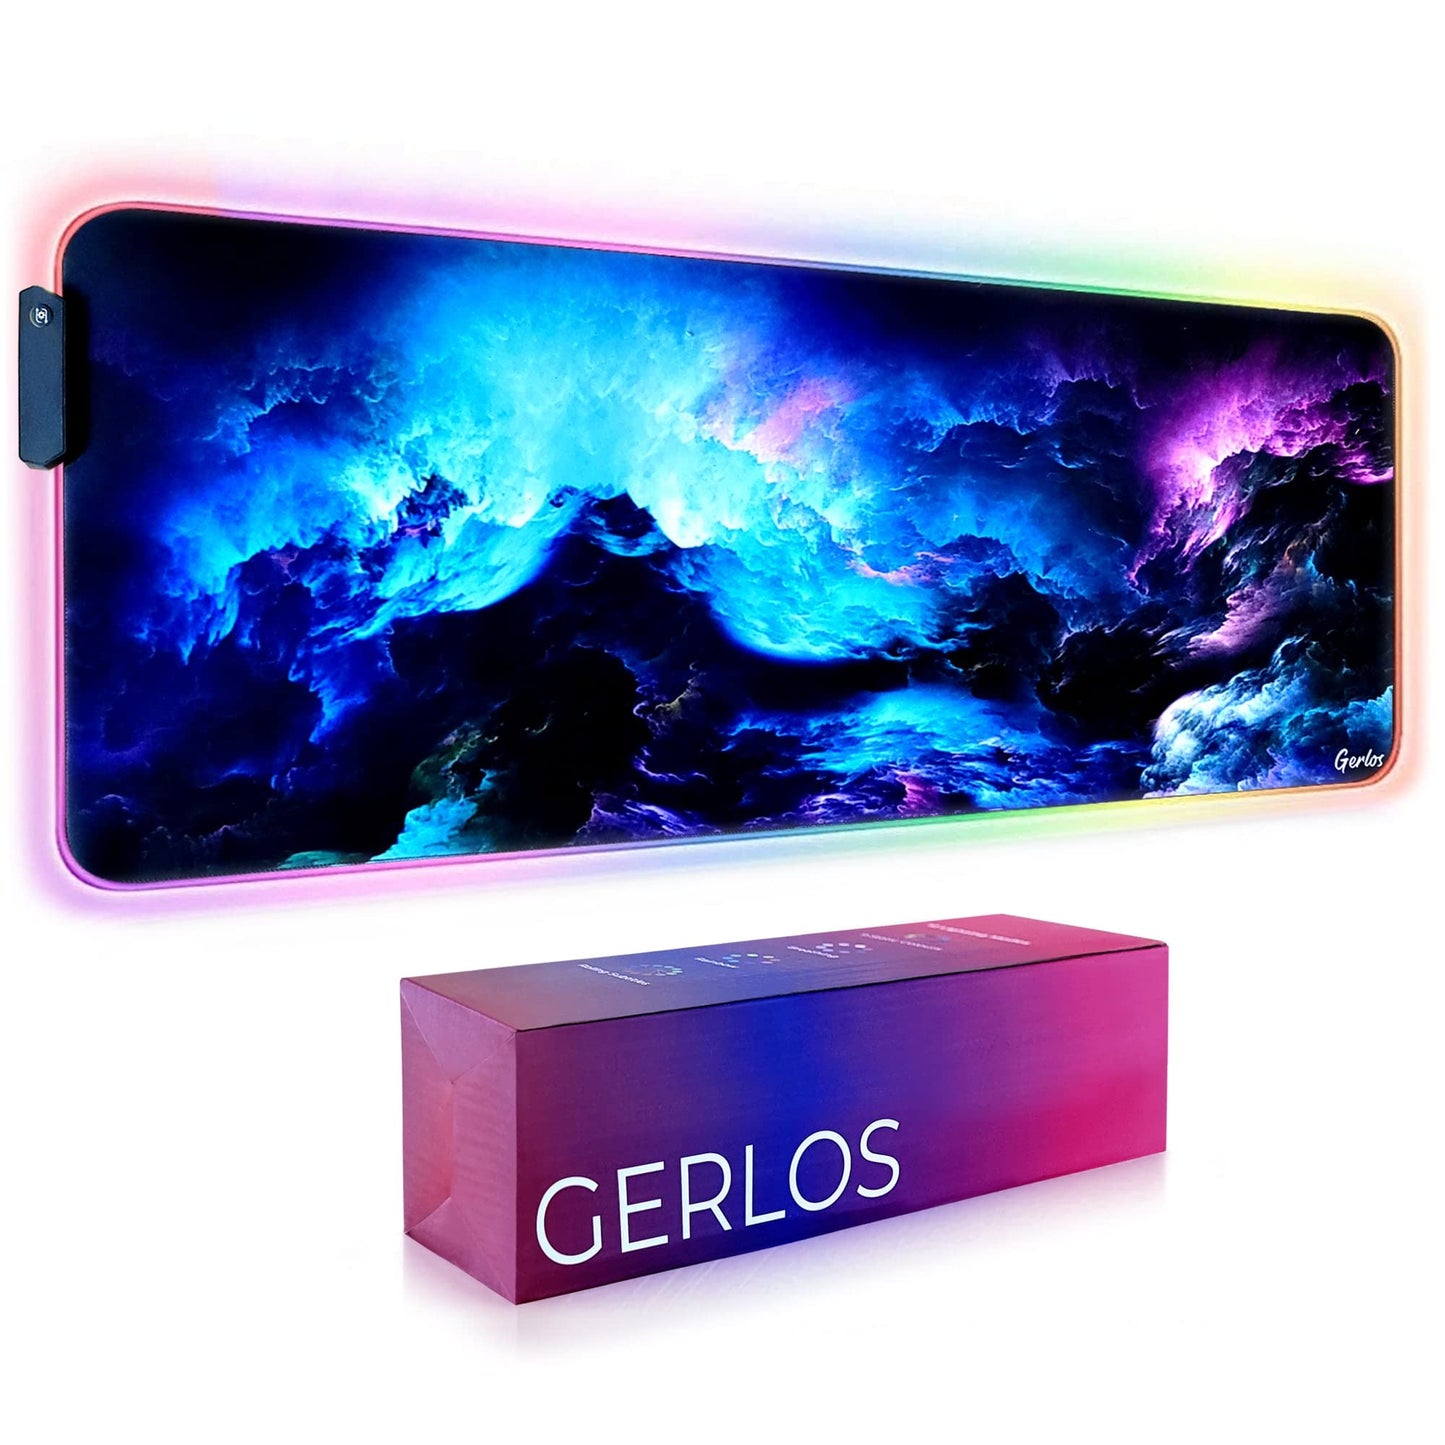 Gerlos RGB Large Gaming Mouse Pad, Extended Soft LED Mouse Pad, Non-Slip Rubber Base, Water Resist Keyboard Pad, Computer Mousepad 31.5×11.8 inches - amzGamess